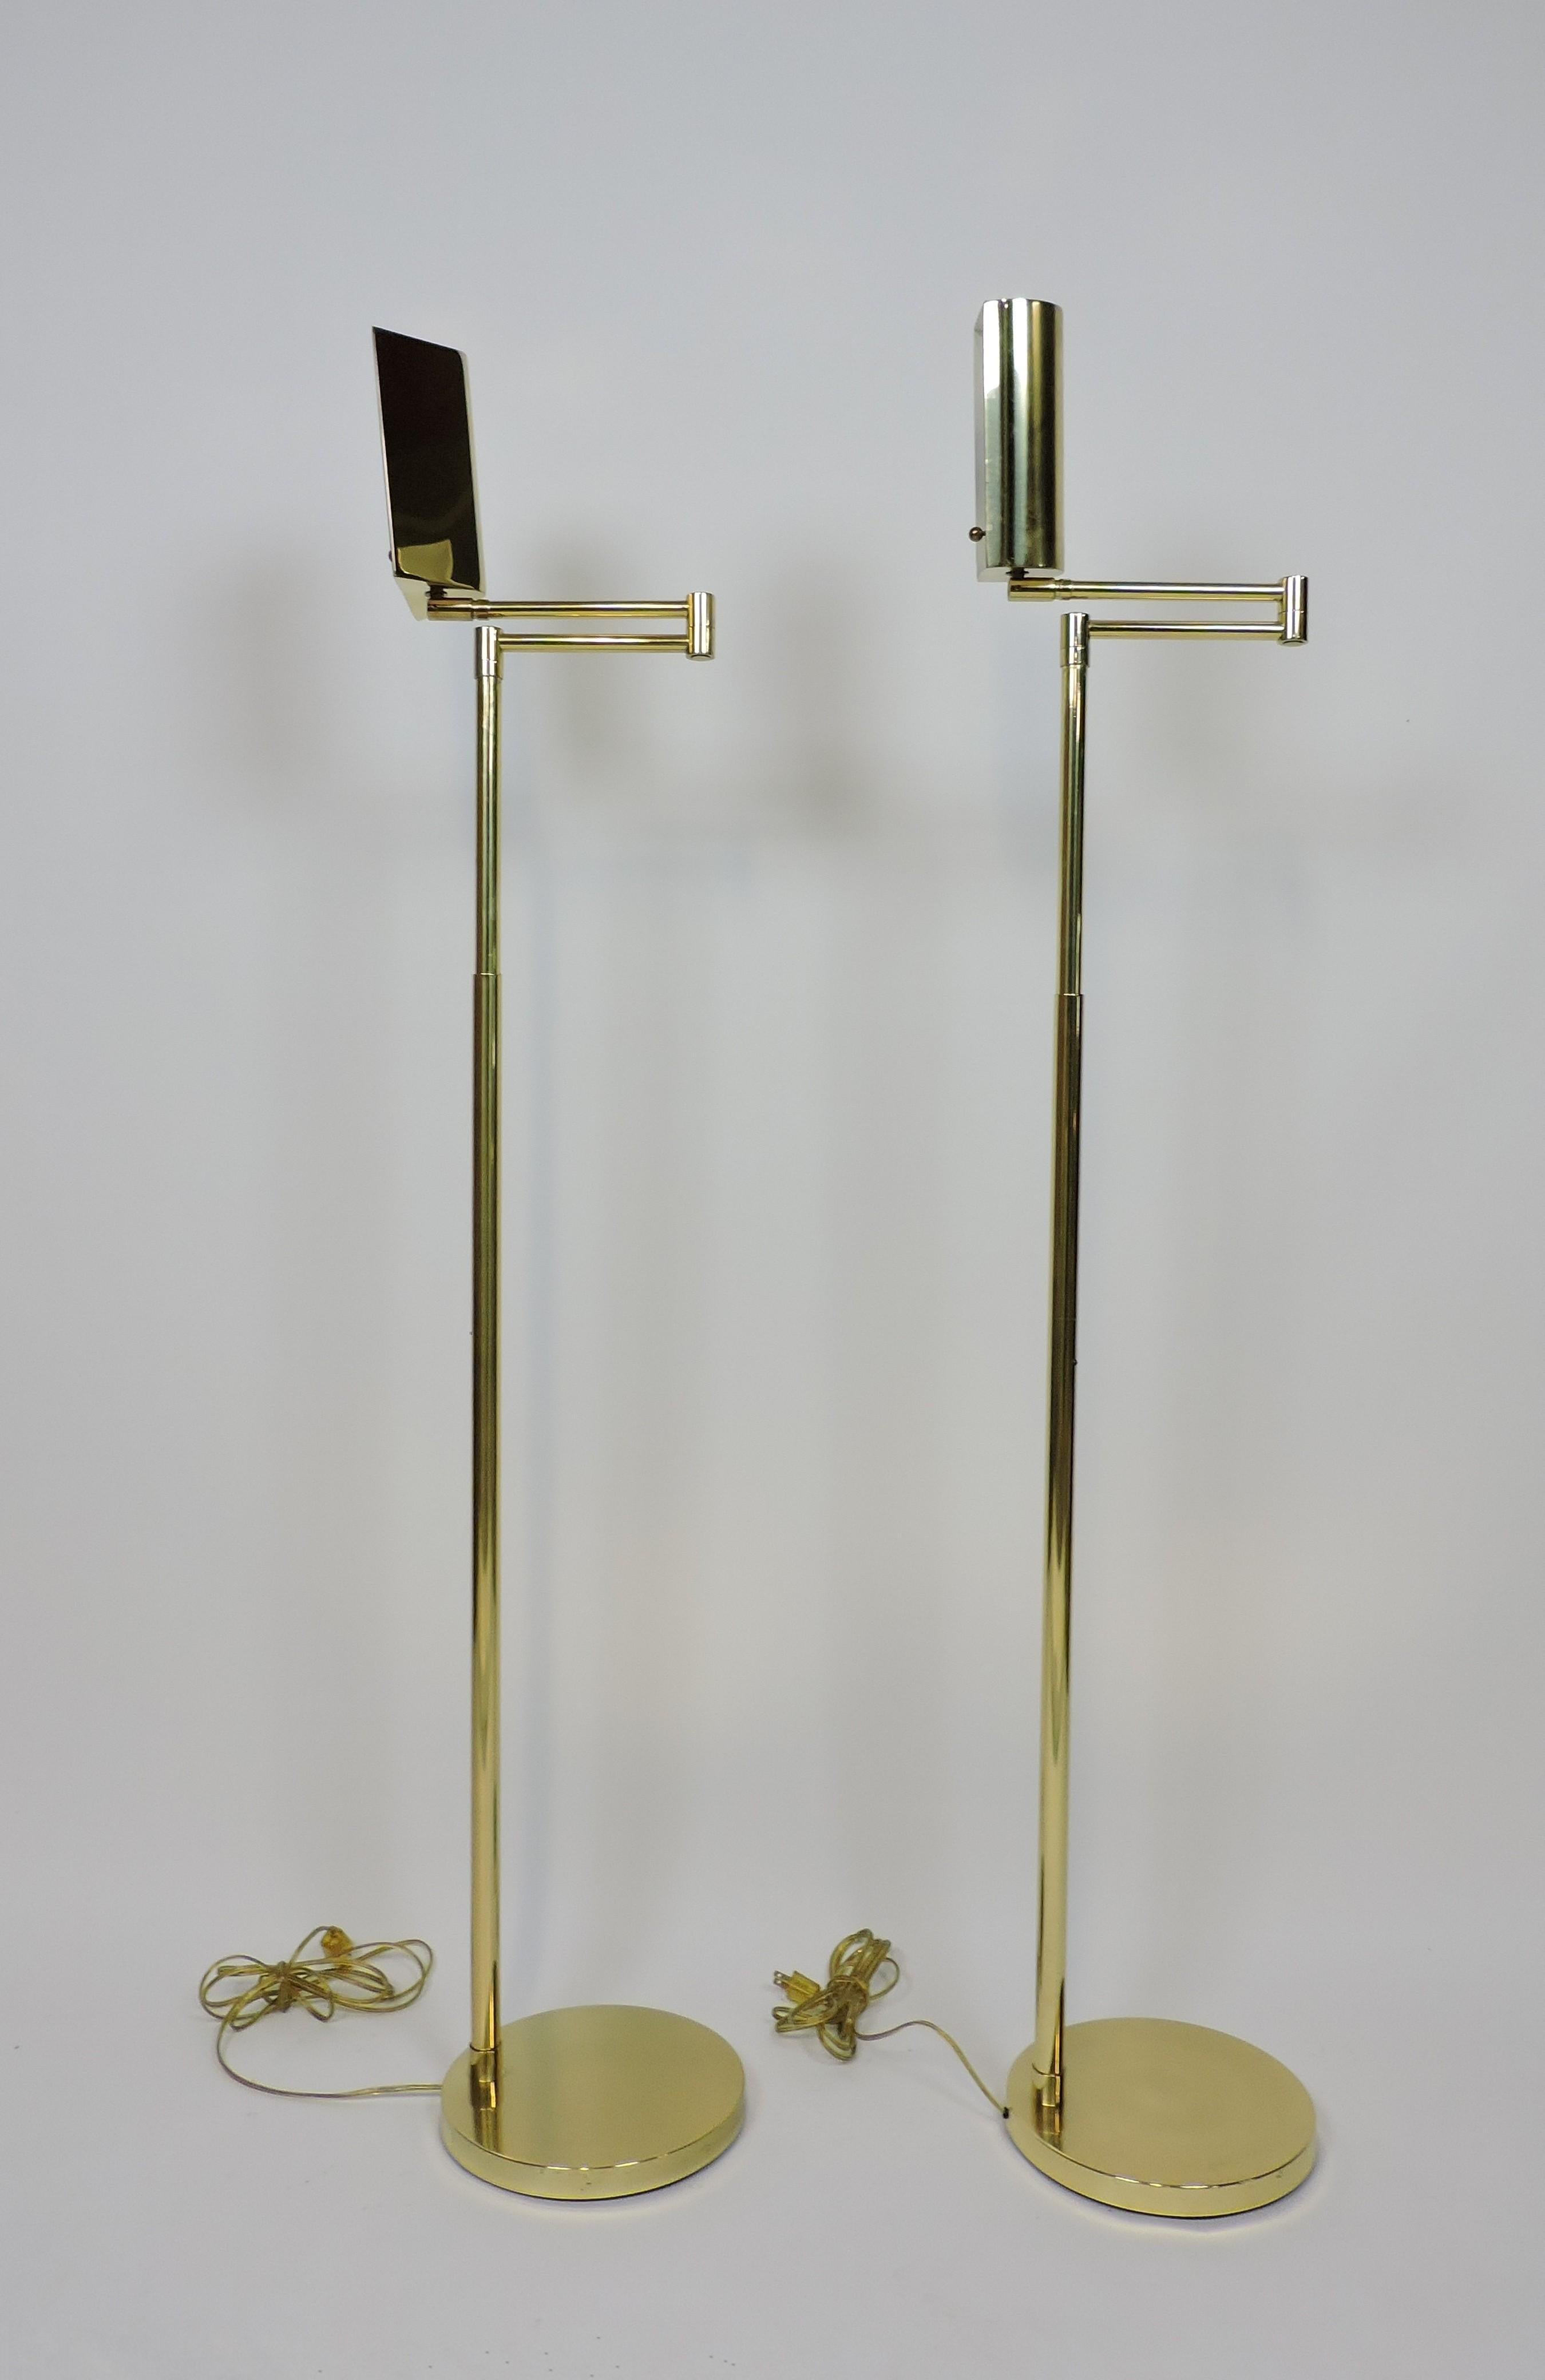 American Mid-Century Modern Adjustable Brass Floor Lamp Koch & Lowy Style, Two Available